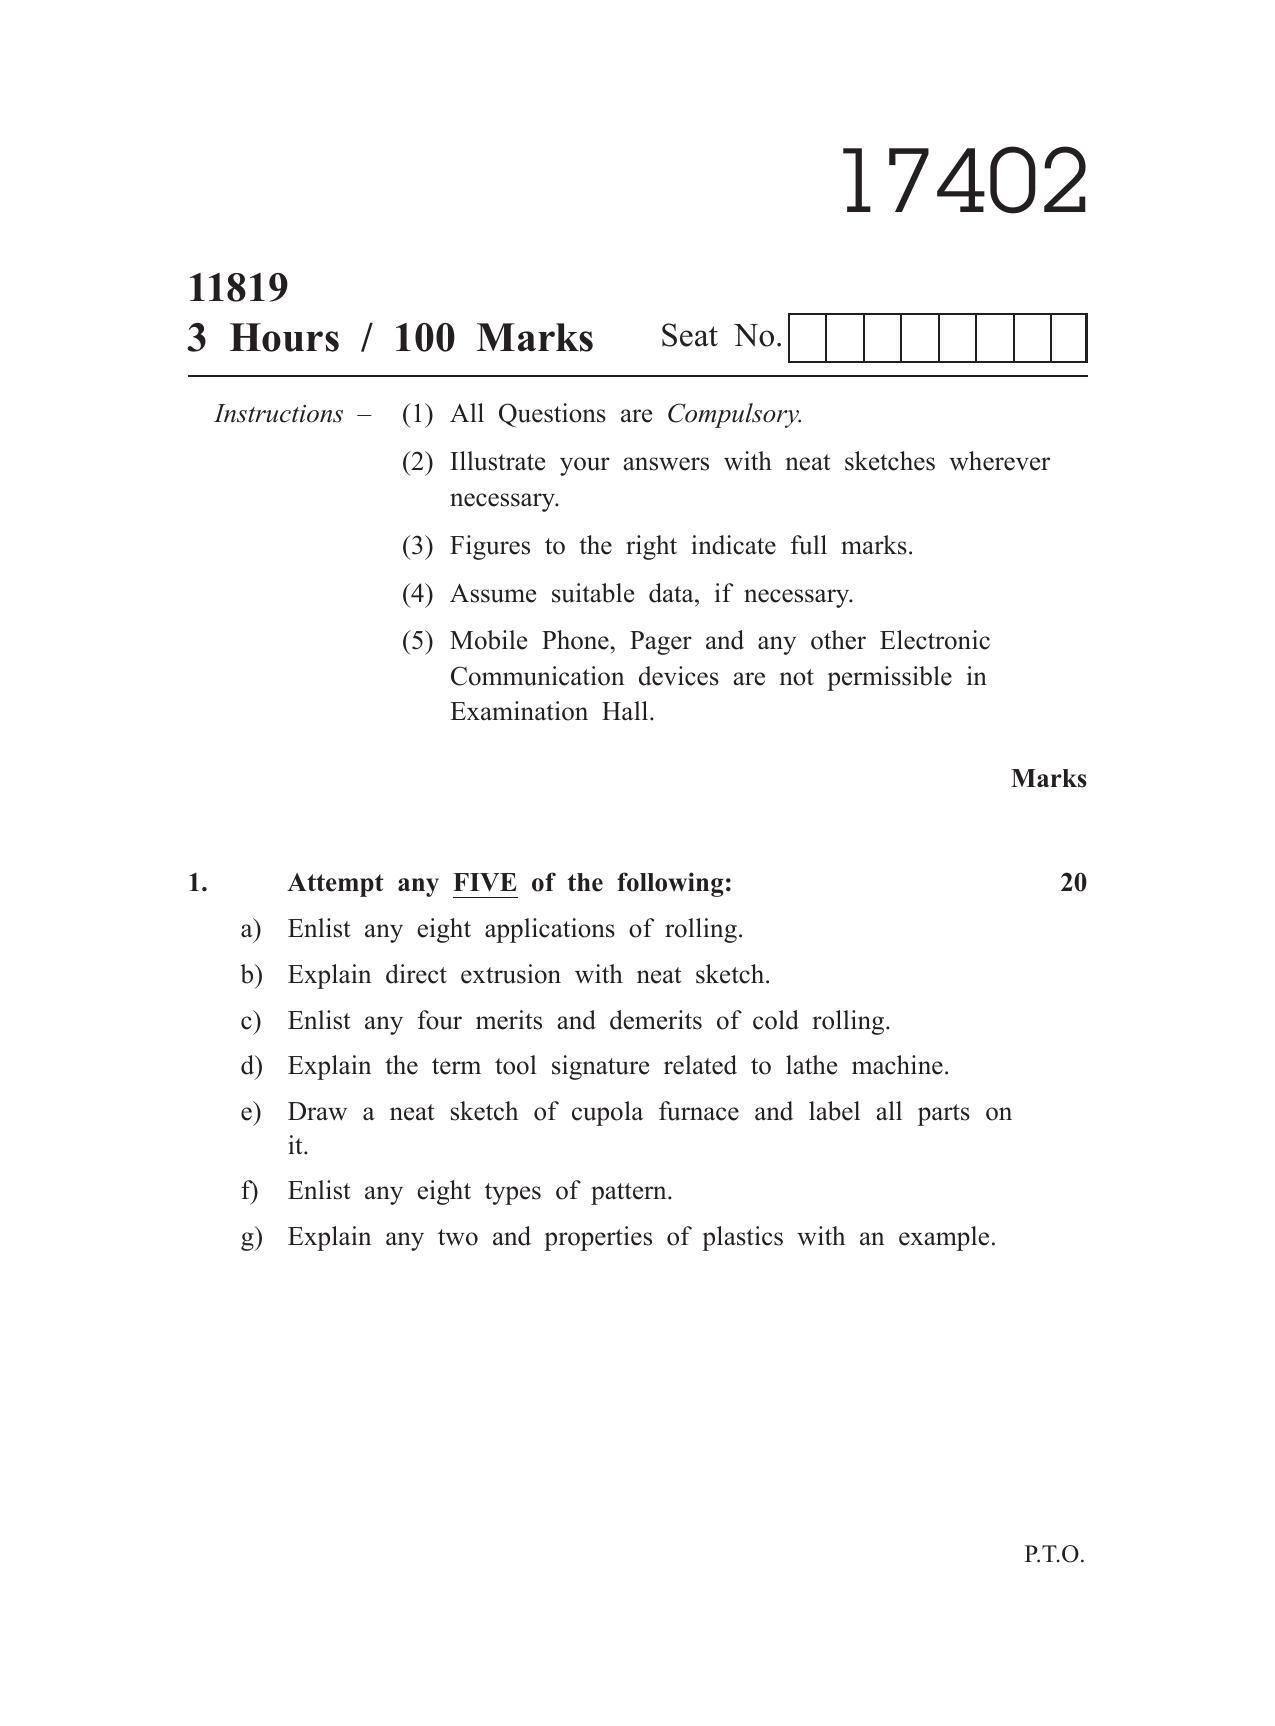 MSBTE Question Paper - 2018 - Manufacturing Processes - Page 1